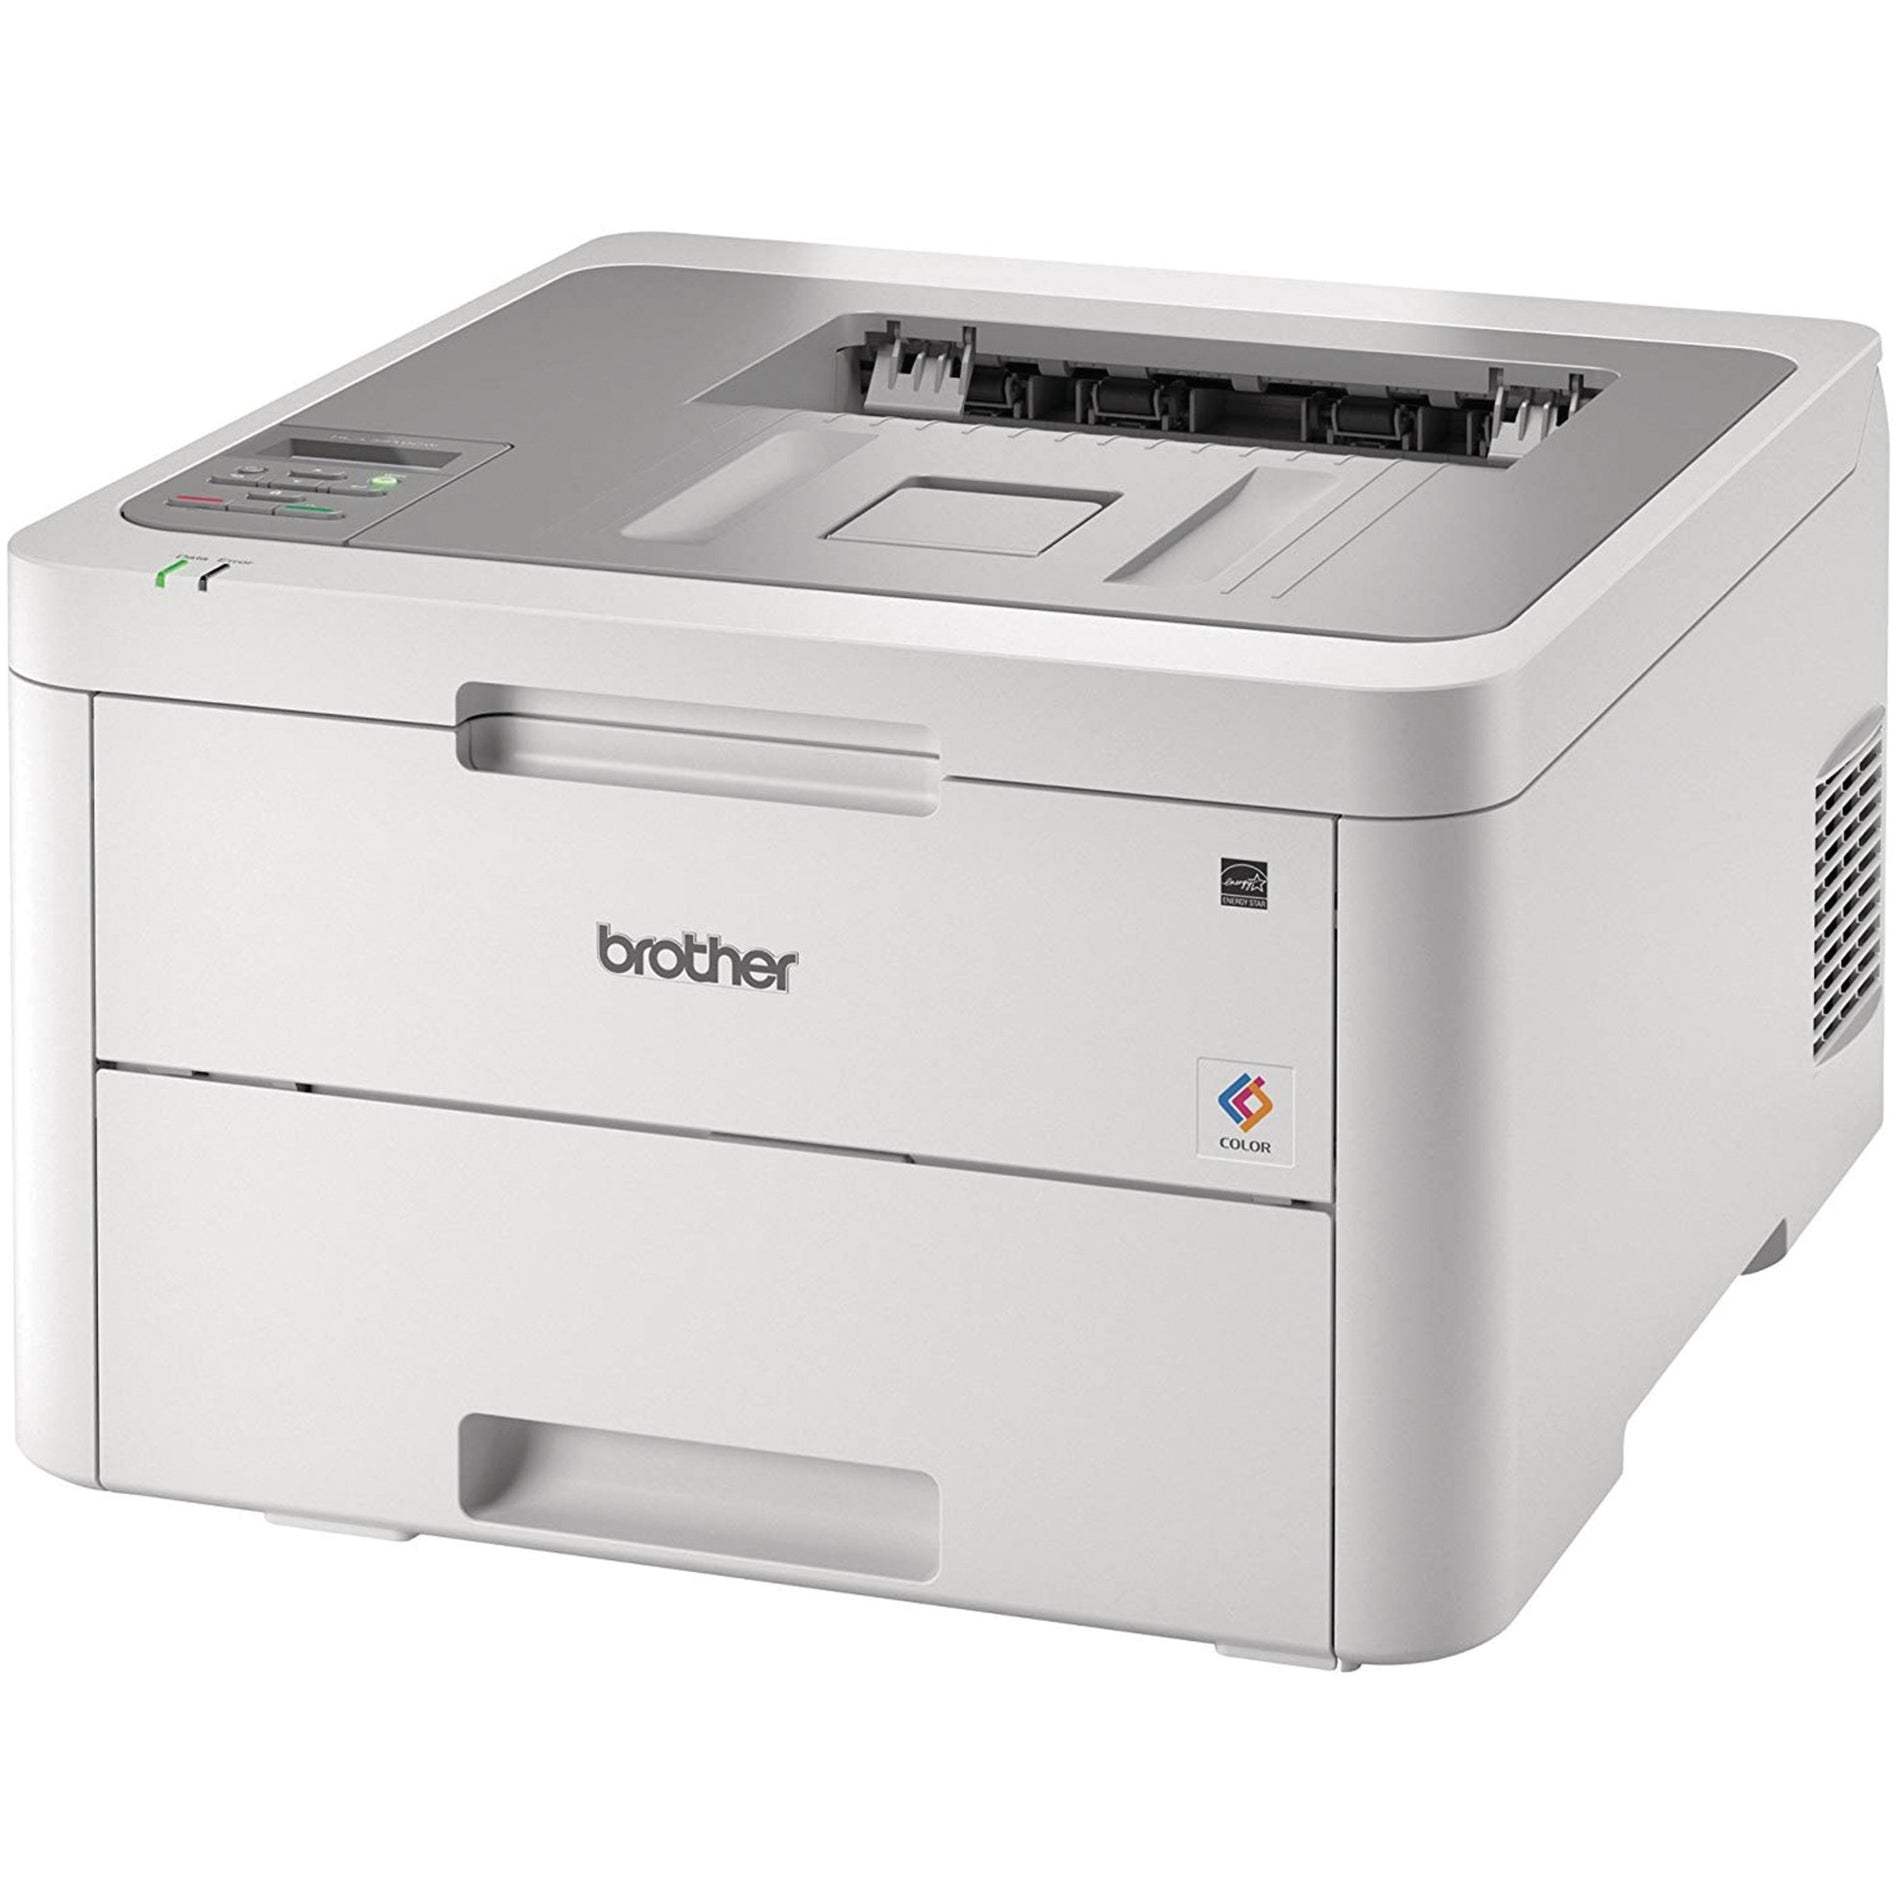 Brother HL-L3210CW Laser Printer, 19 ppm, 250-Sheet Capacity, Wireless, White/Gray